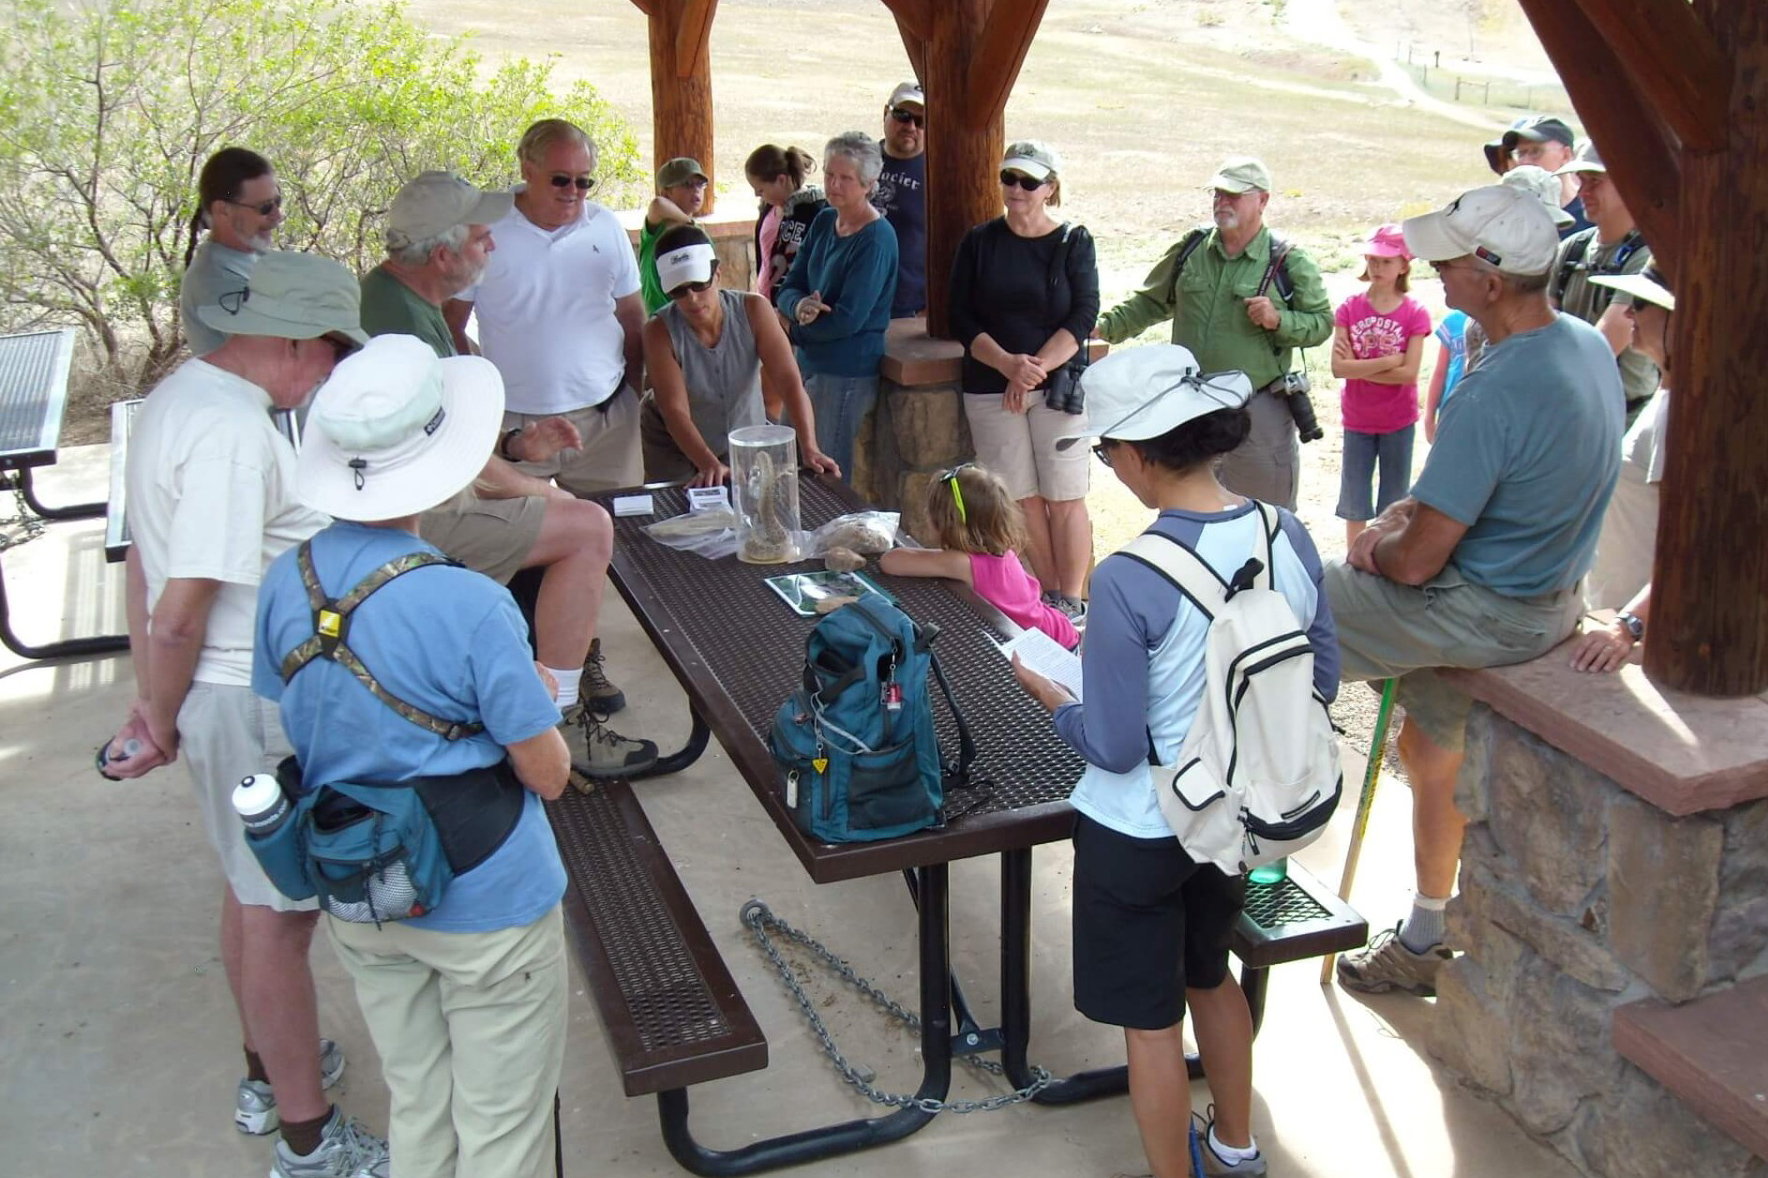 A large group of people gather around a park shelter listening to a tour guide